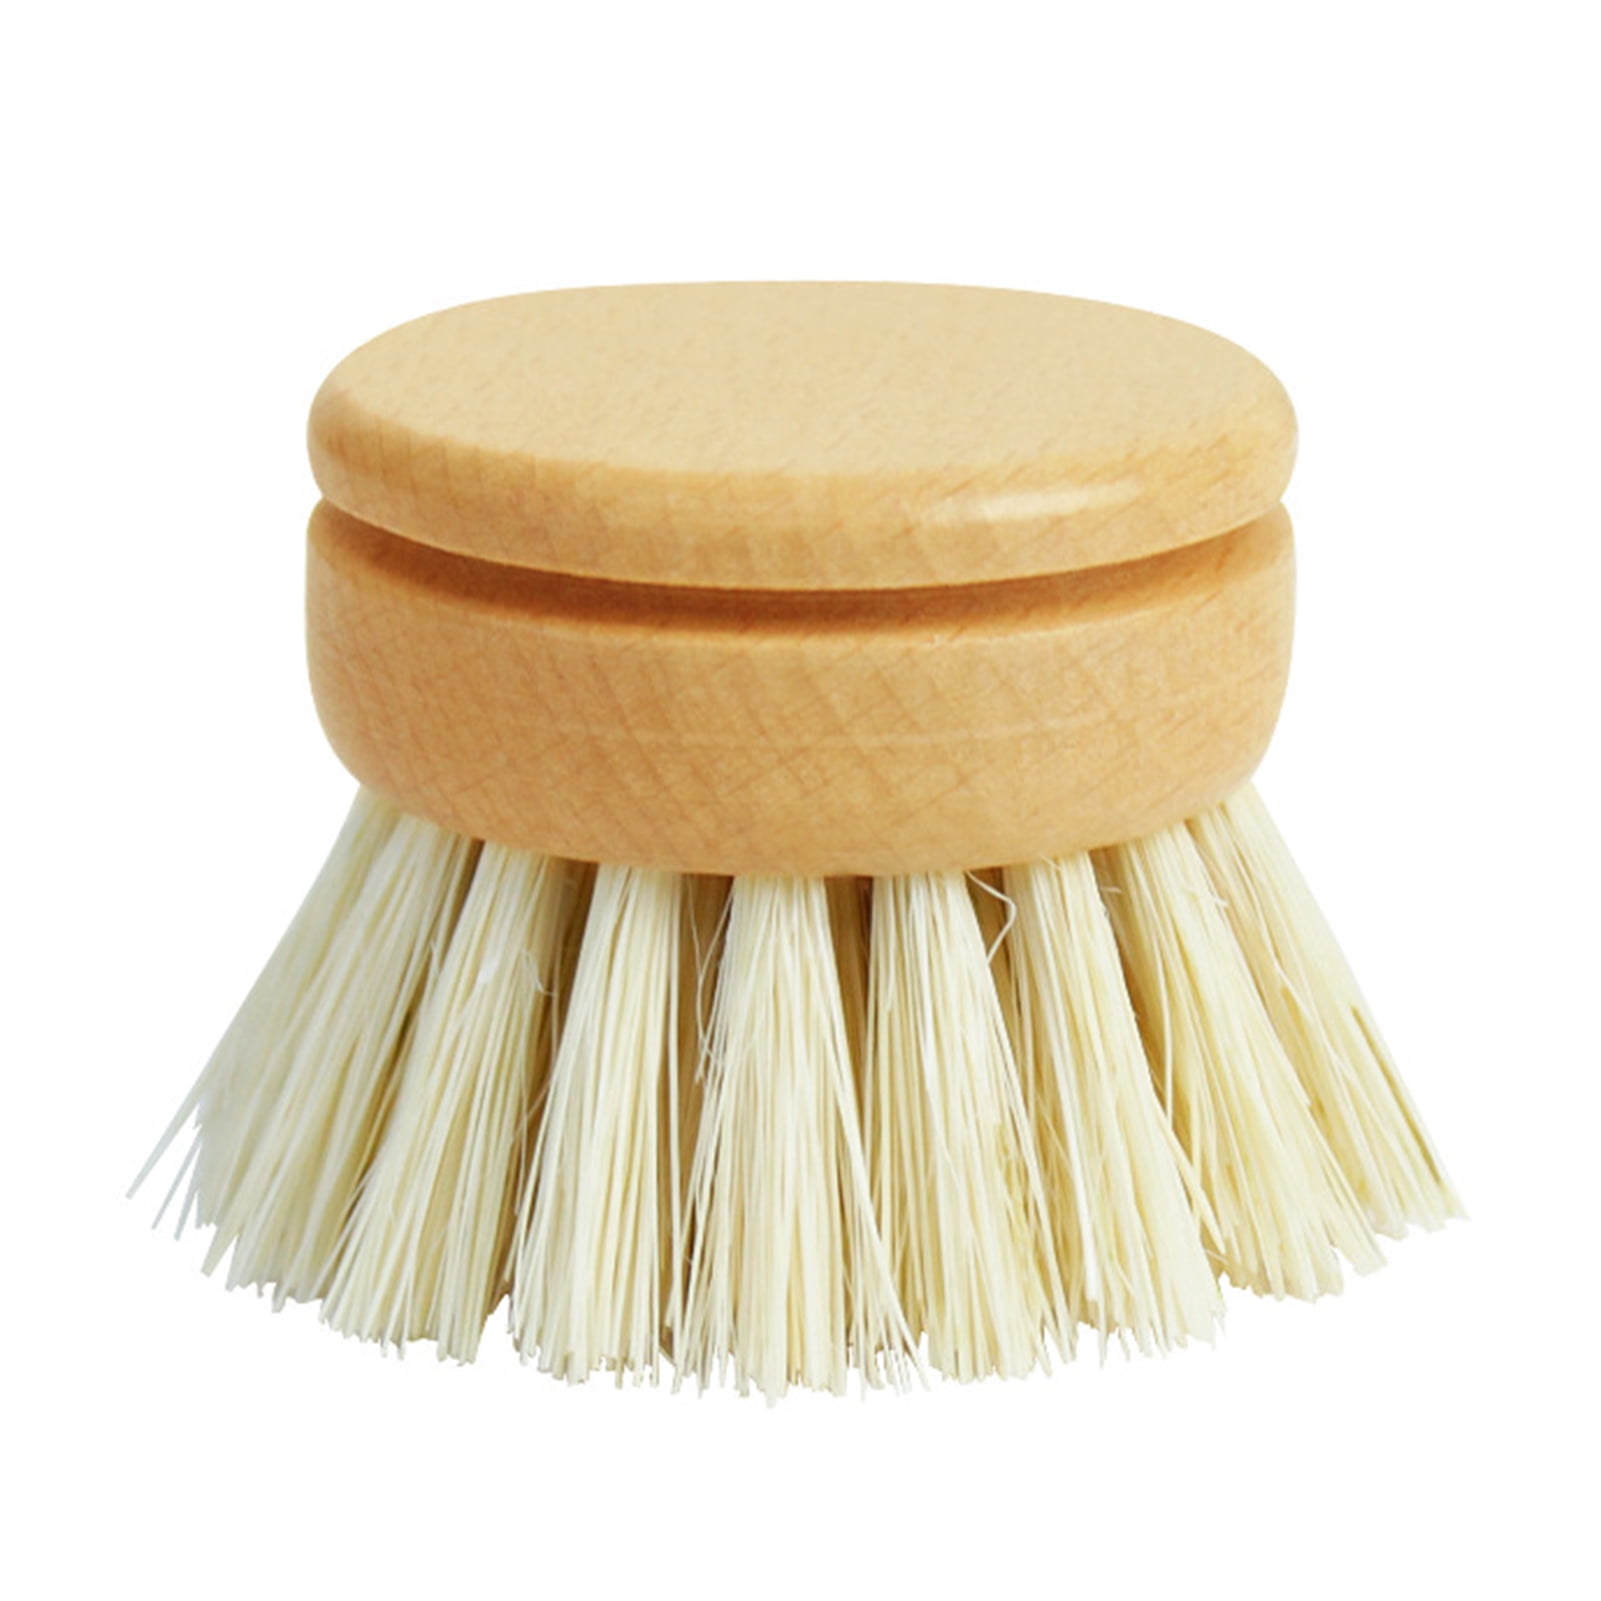 50 cm Heavy Duty Broom Sweeping Brush Head Replacement Soft Natural Bristle